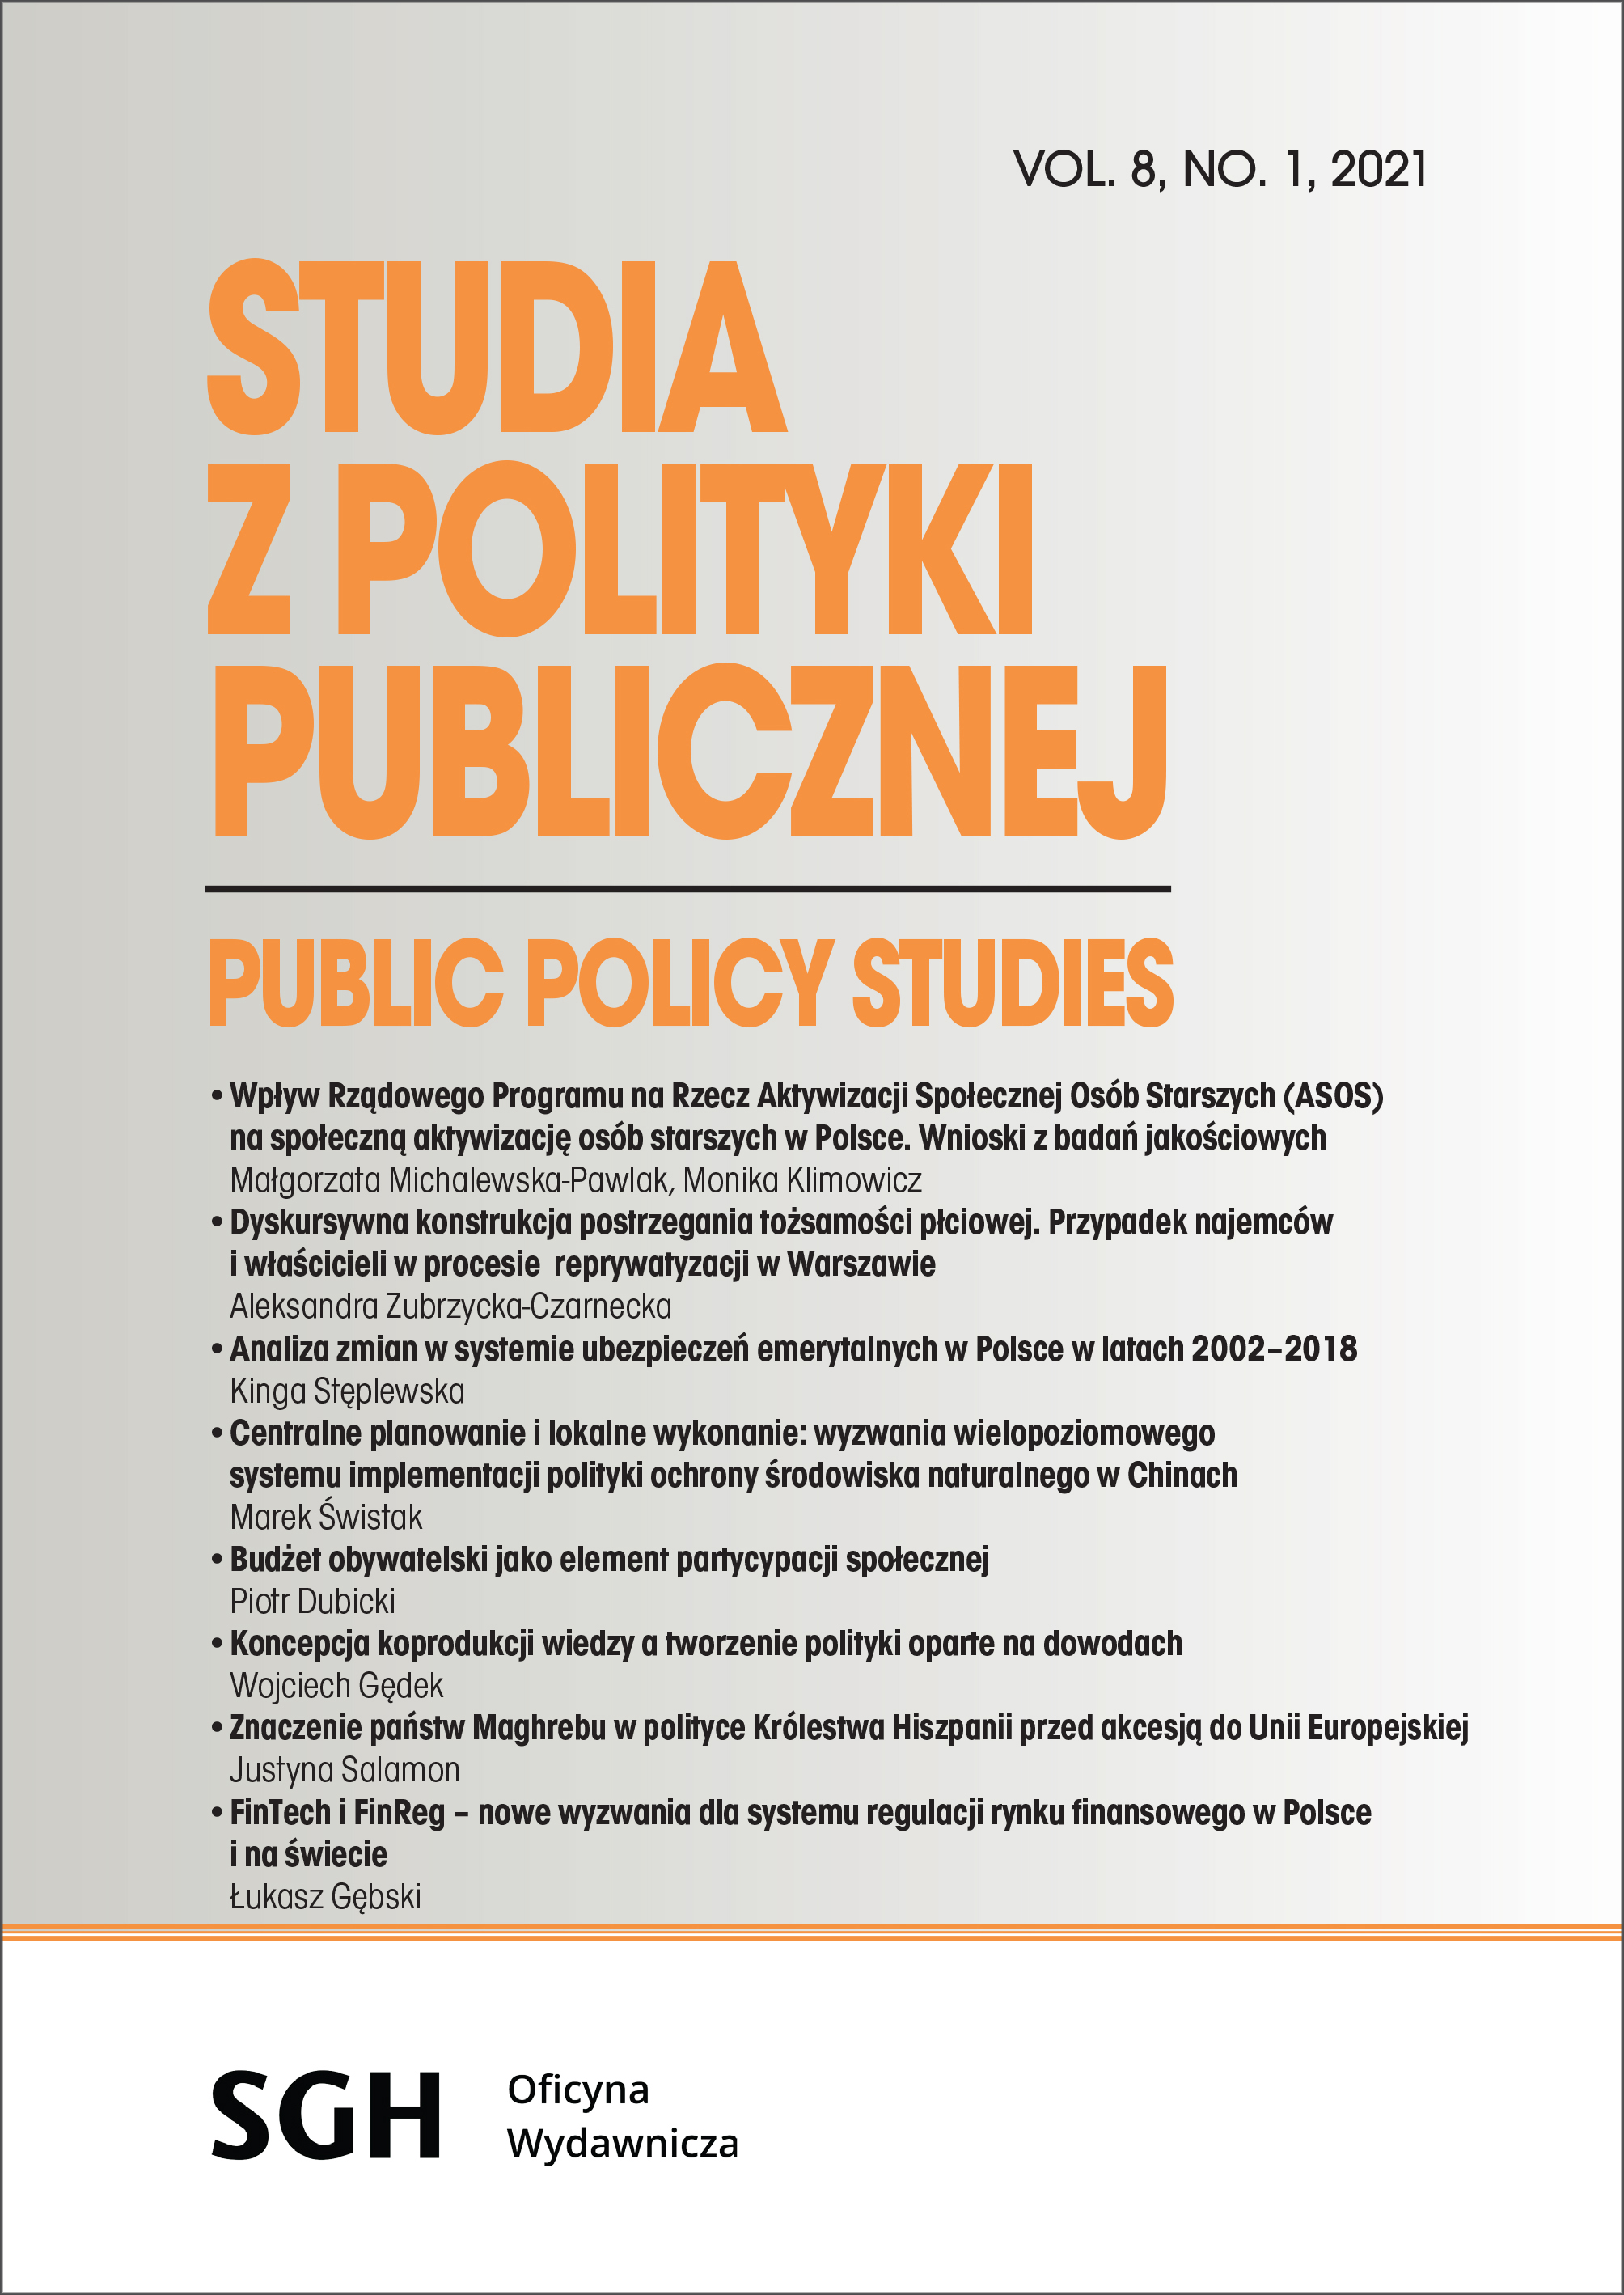 Analysis of changes in the retirement insurance system in Poland in 2002-2018